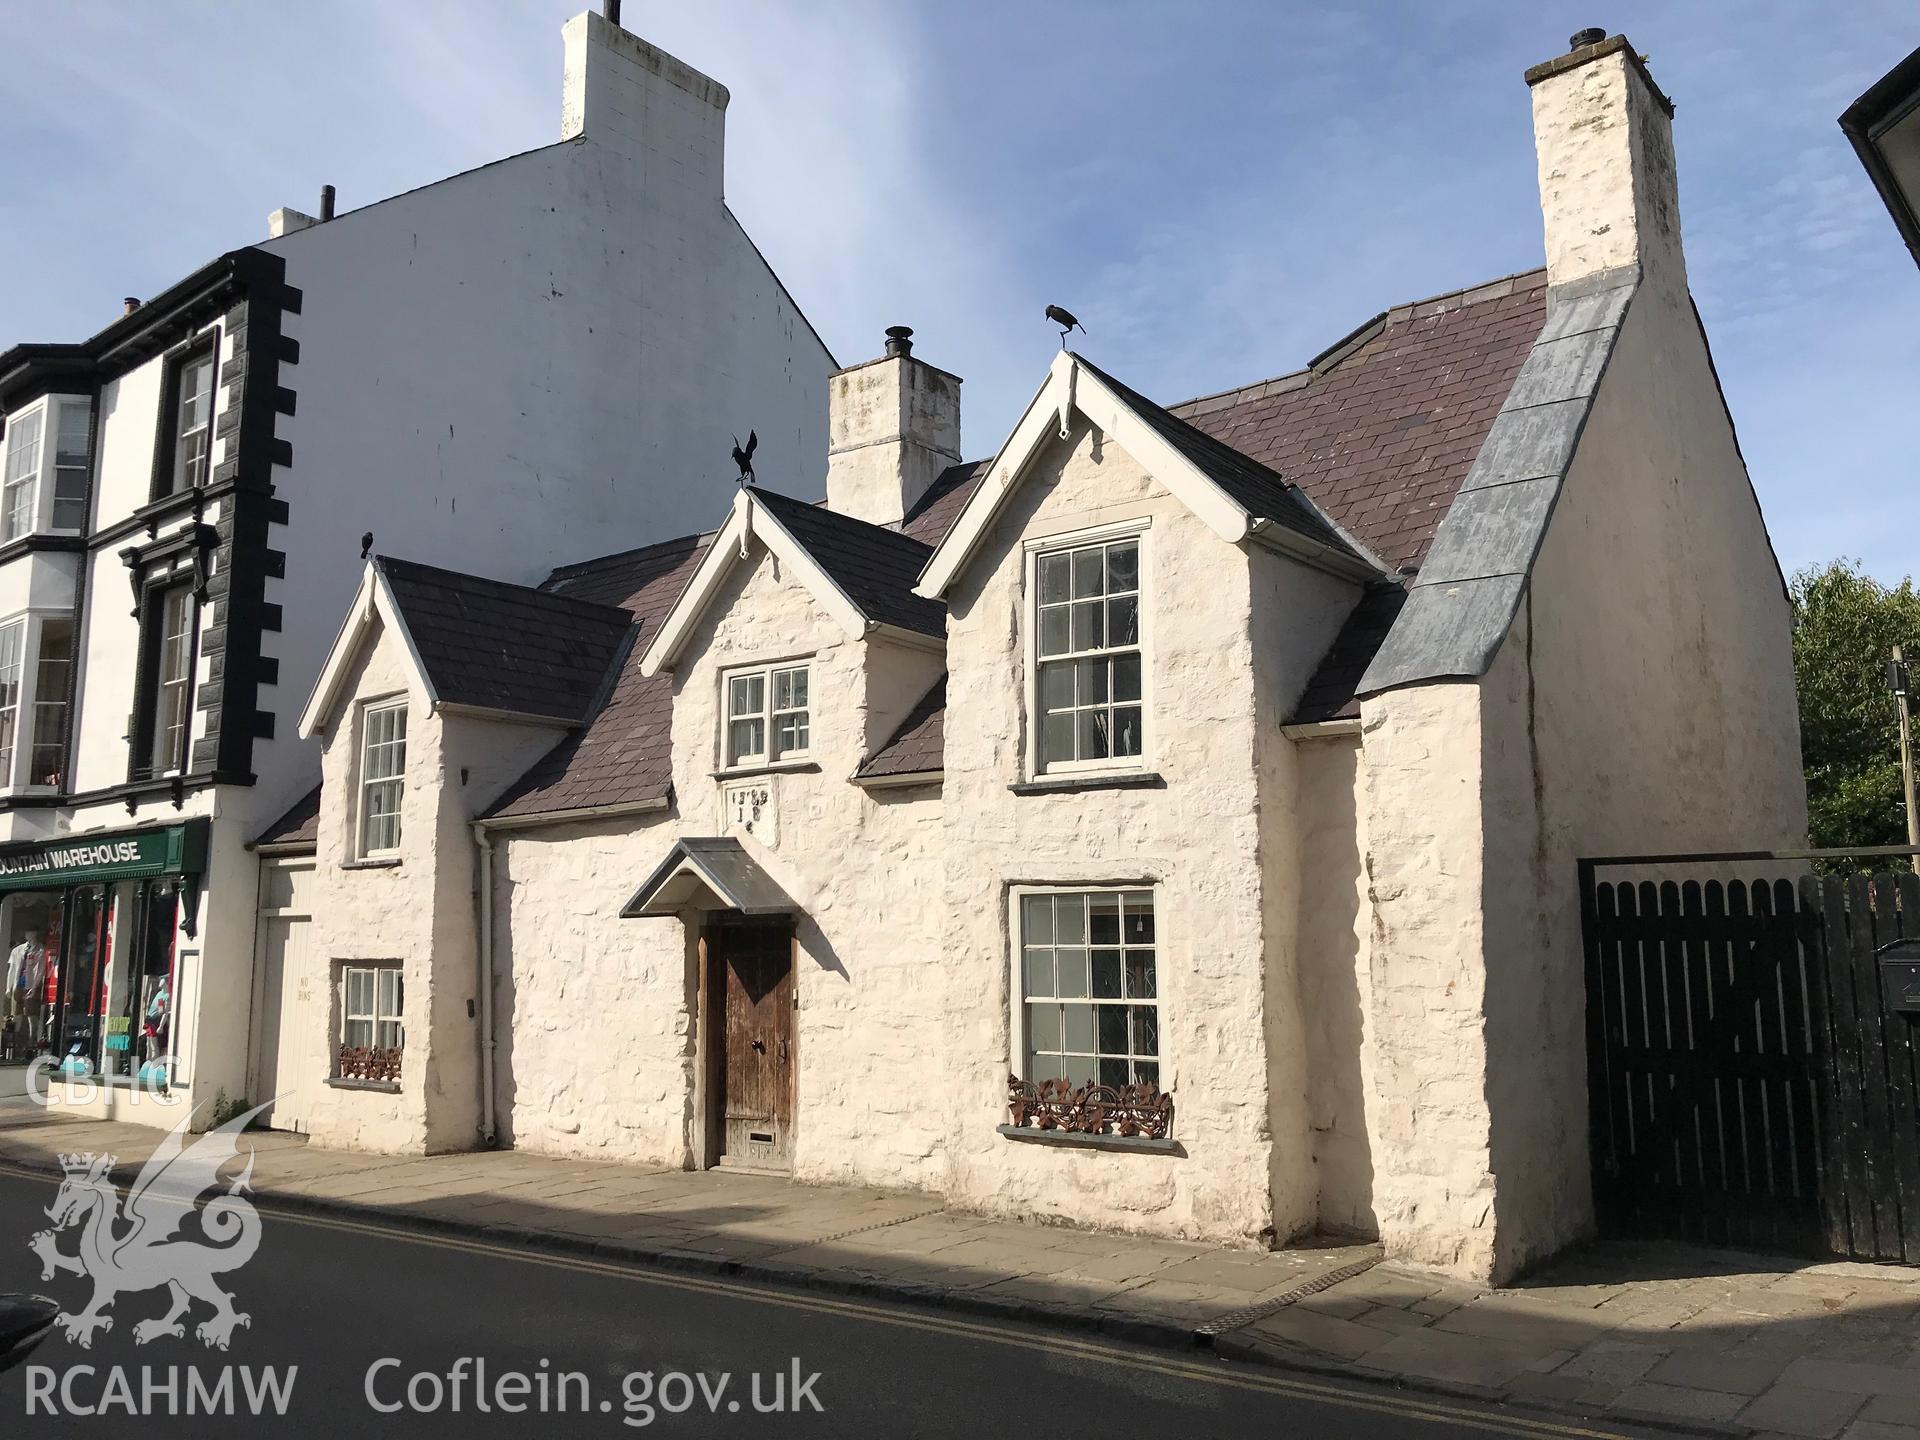 Colour photo showing exterior view of former Black Lion Hotel, 11 Castle Street, Conwy, taken by Paul R. Davis, 23rd June 2018.